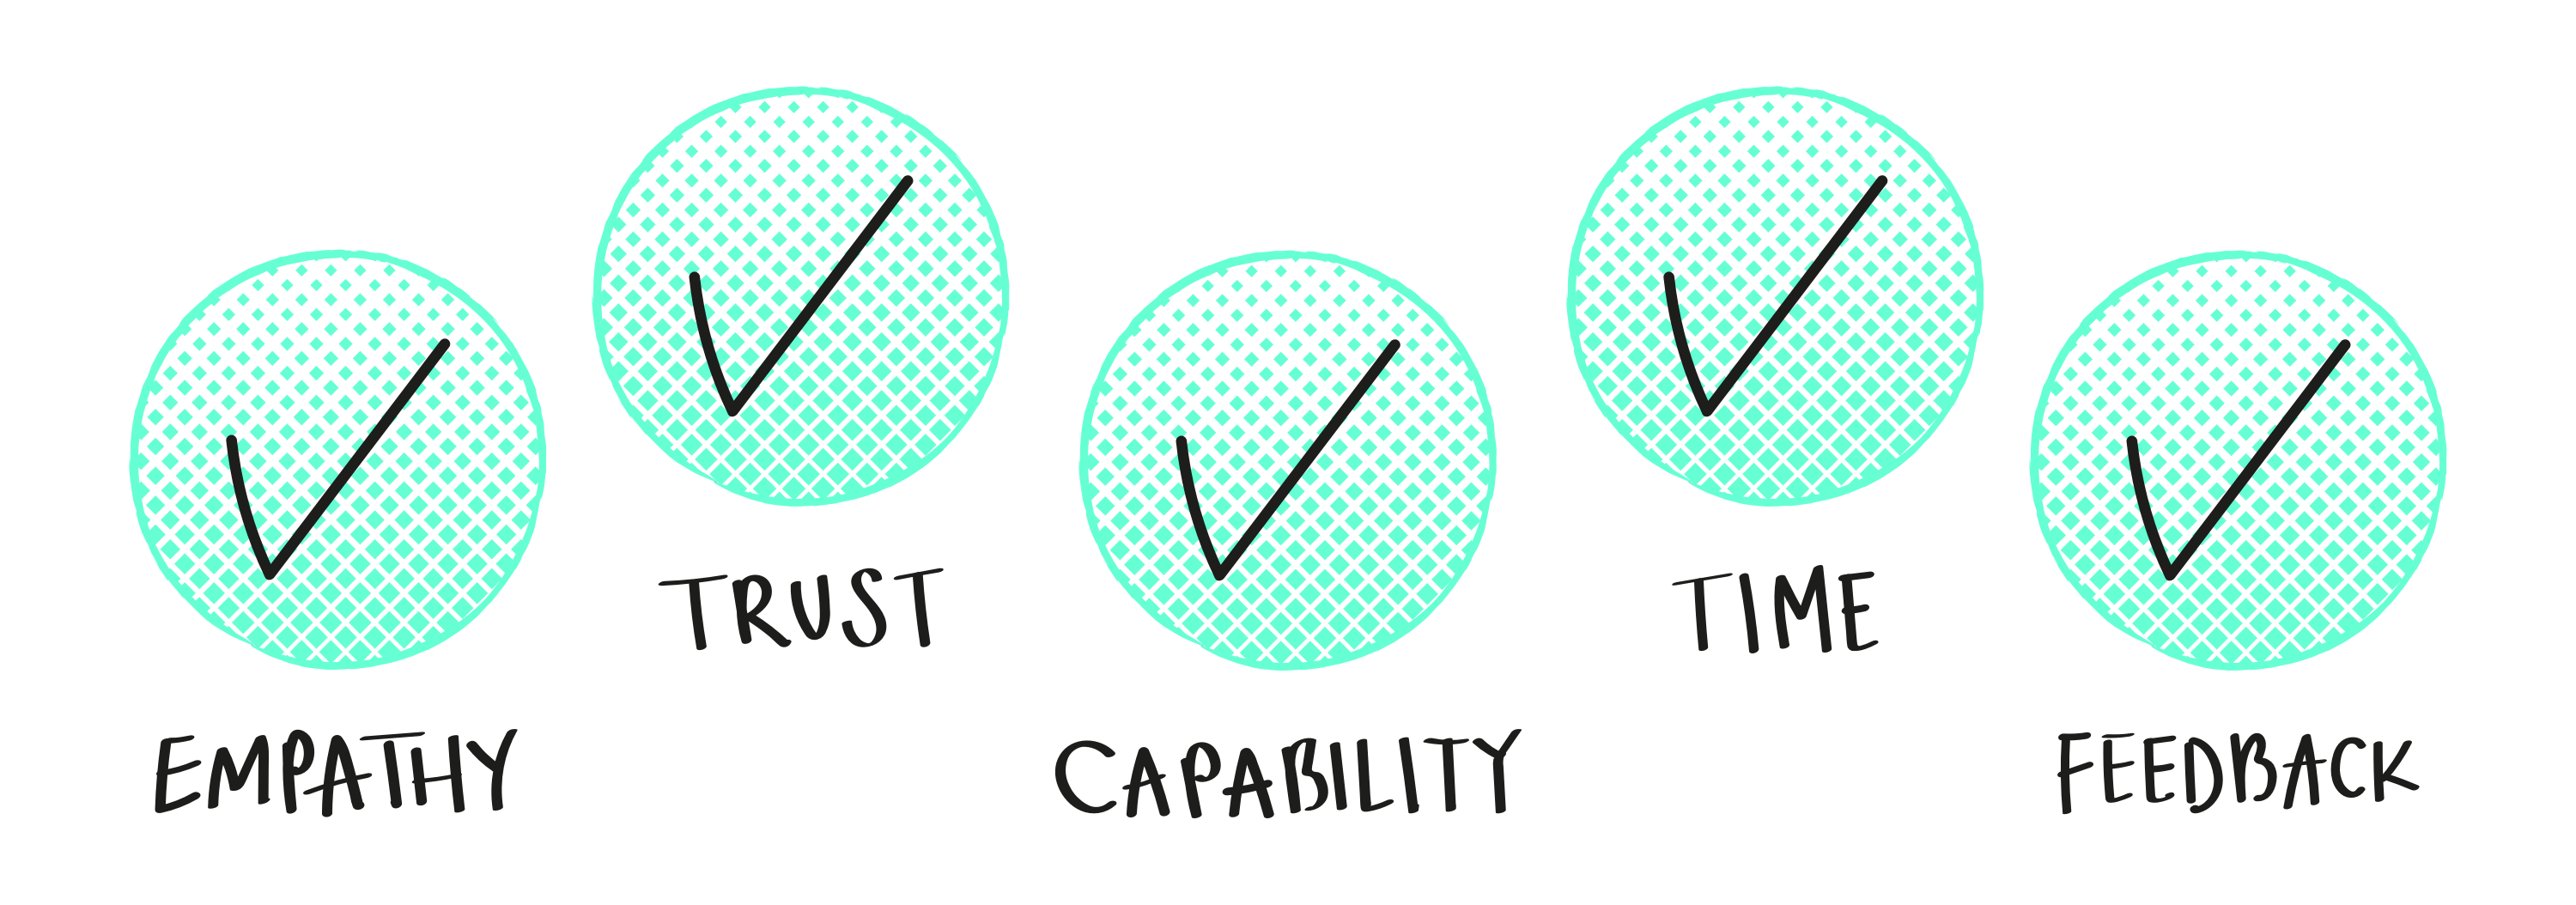 Five circle icons, each with a tick nested within, listing: empathy, trust, capability, time and feedback